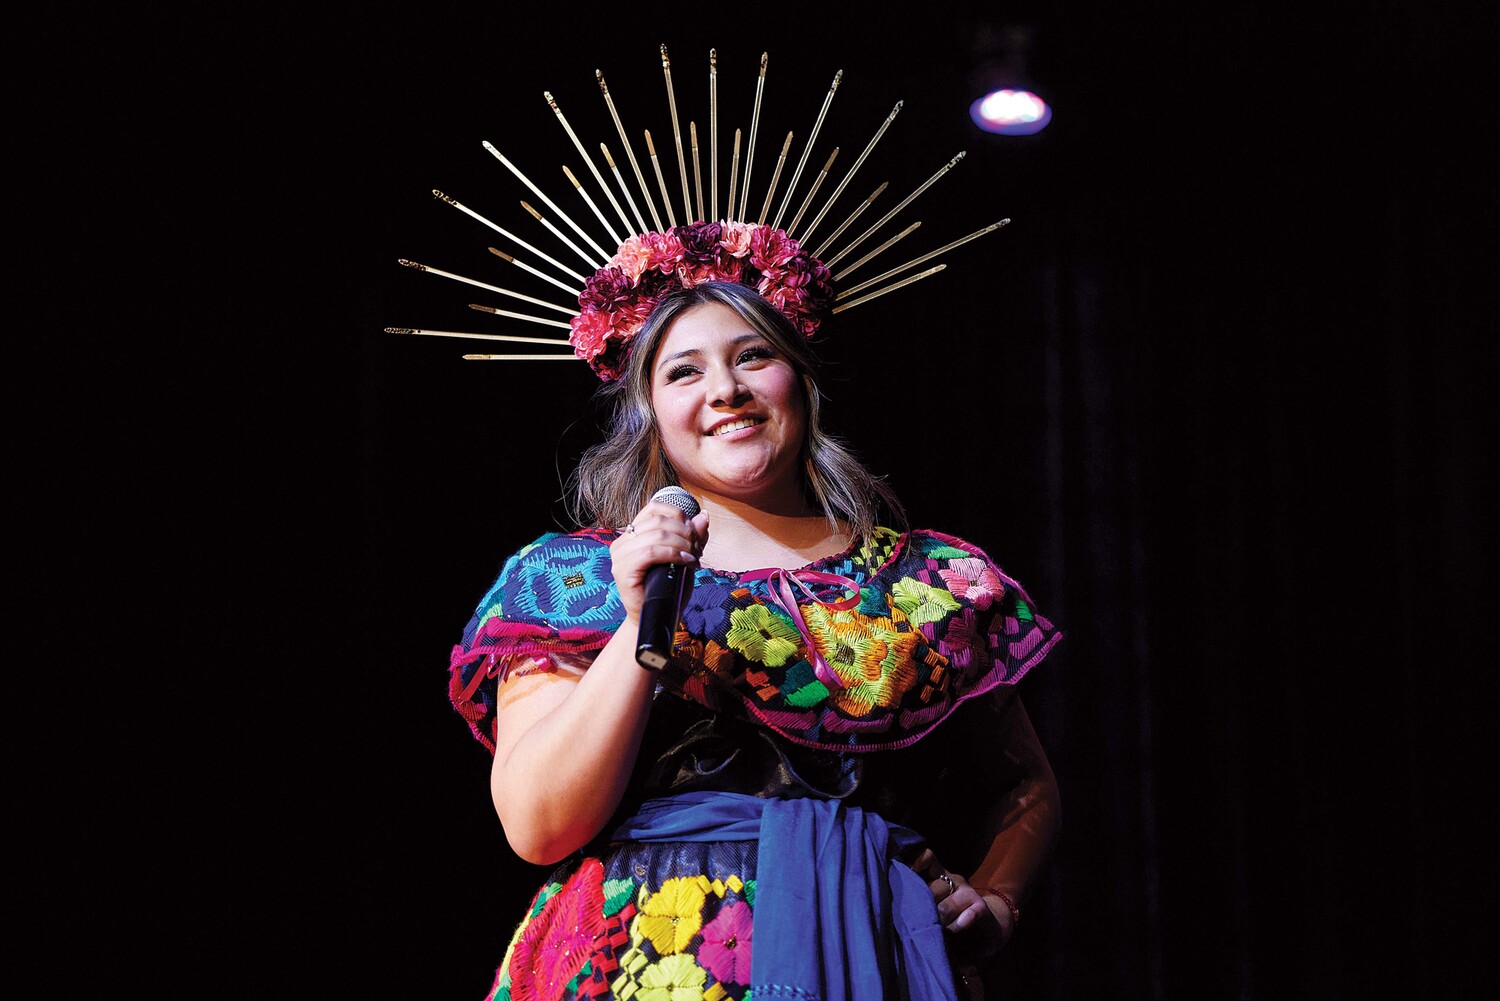 student-life-Hispanic-Royalty-Pageant-by-travis-caperton.jpg